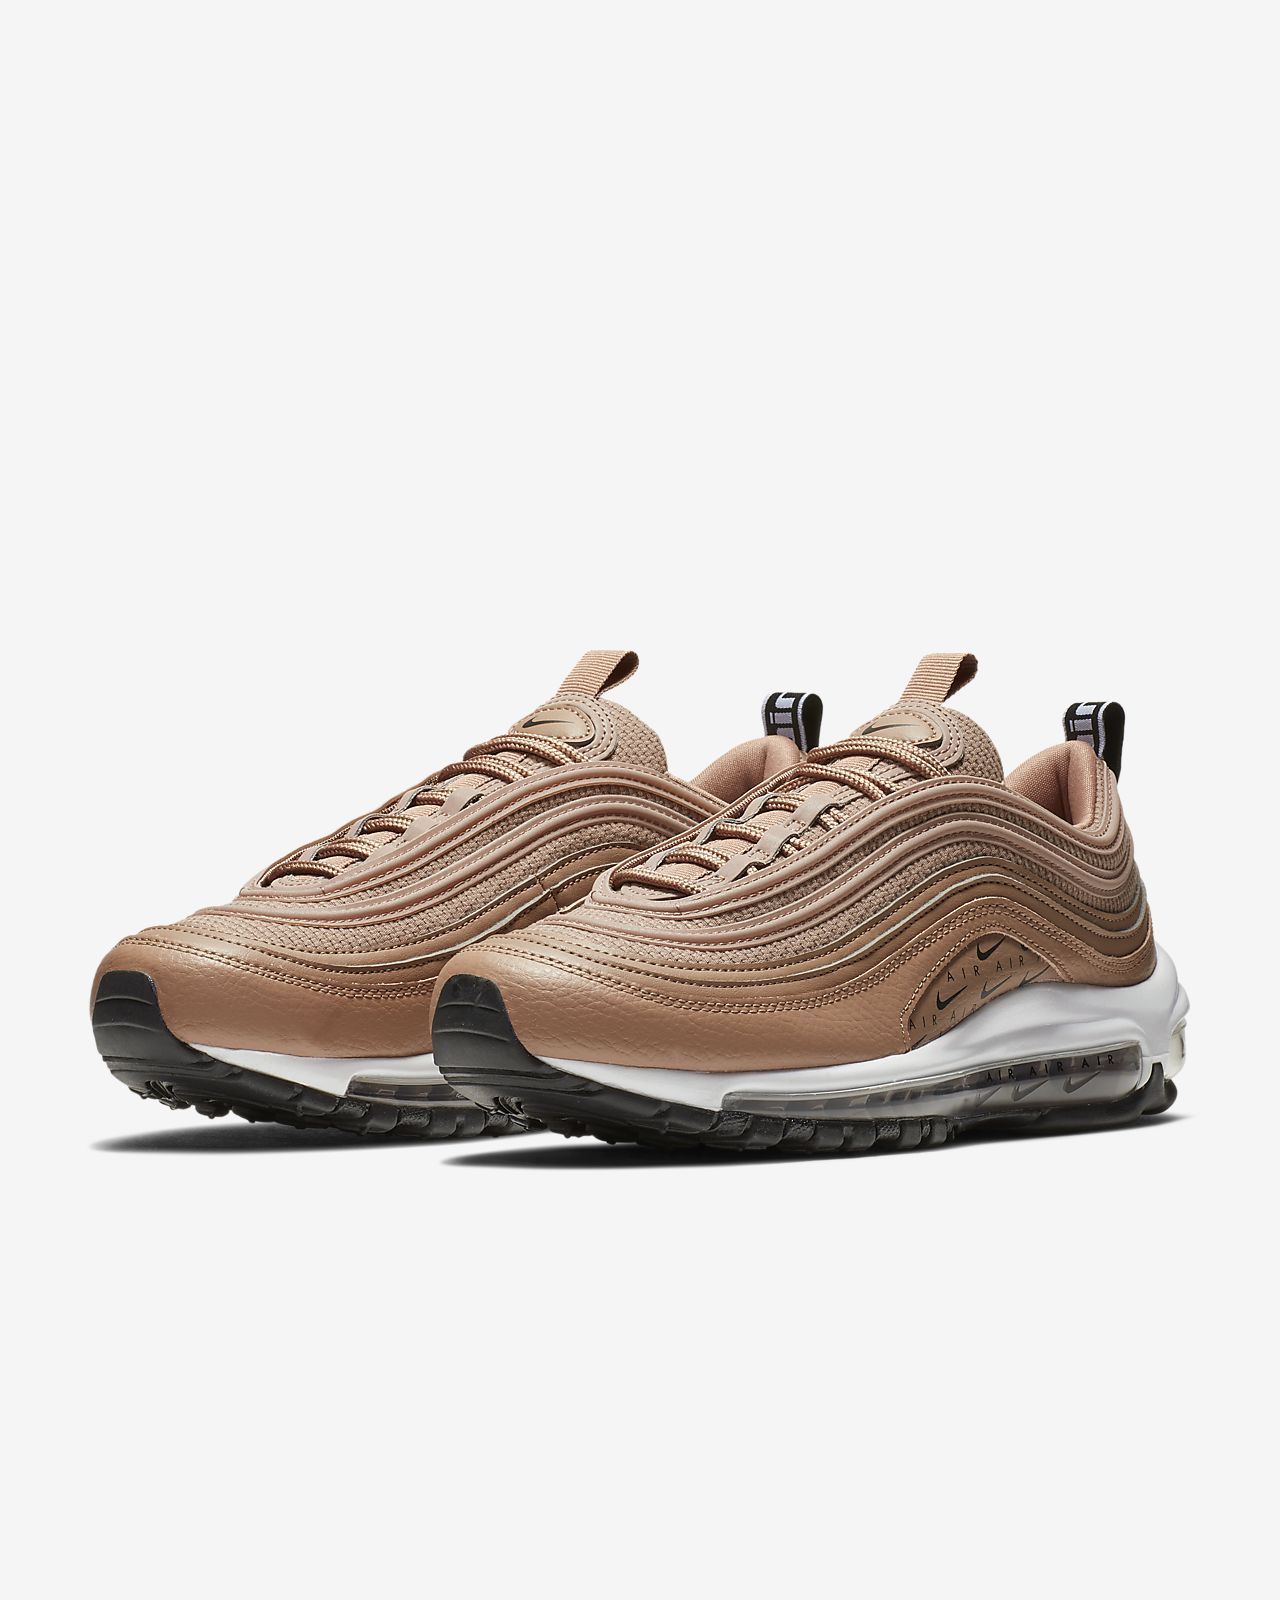 Nike Air Max 97 LX Overbranded Shoe